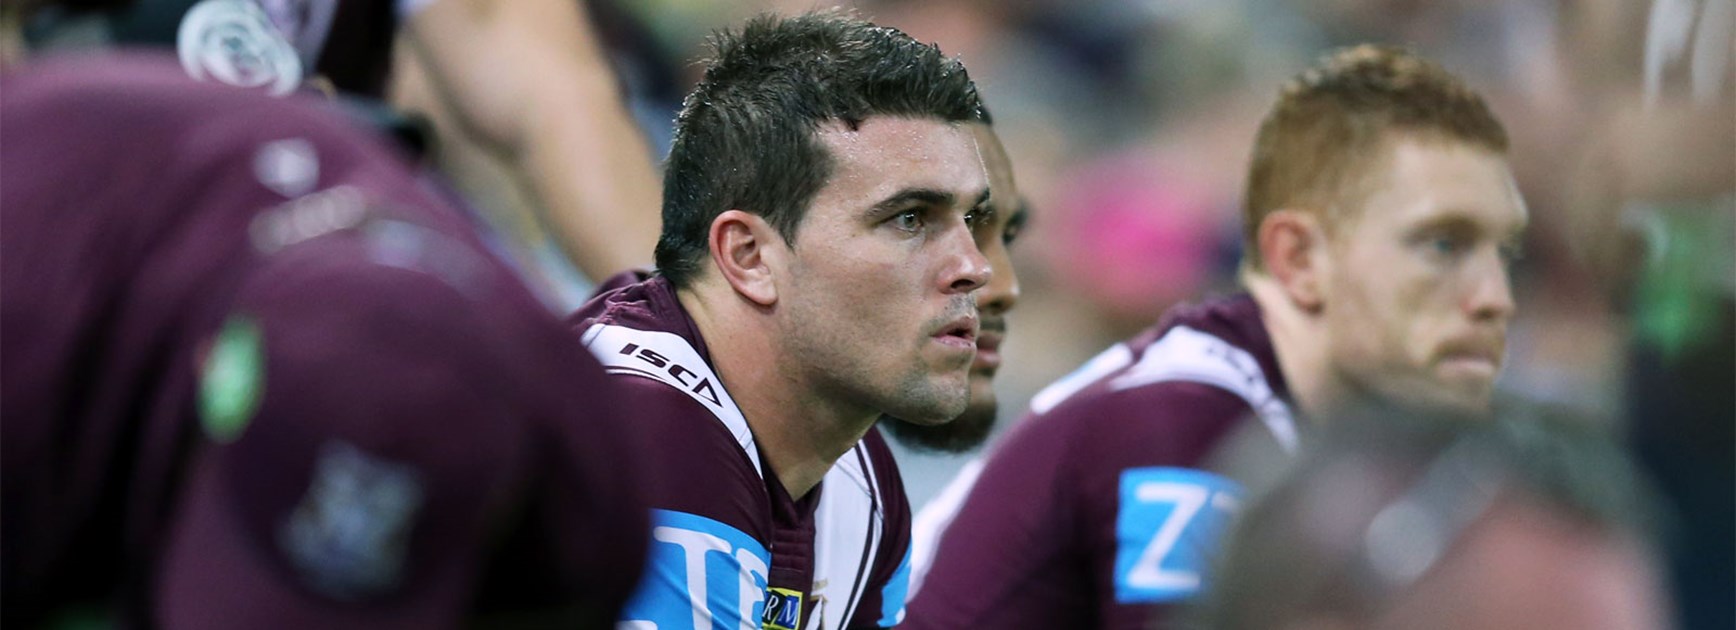 Darcy Lussick on the Manly bench during Saturday night's clash with Brisbane at Suncorp Stadium.